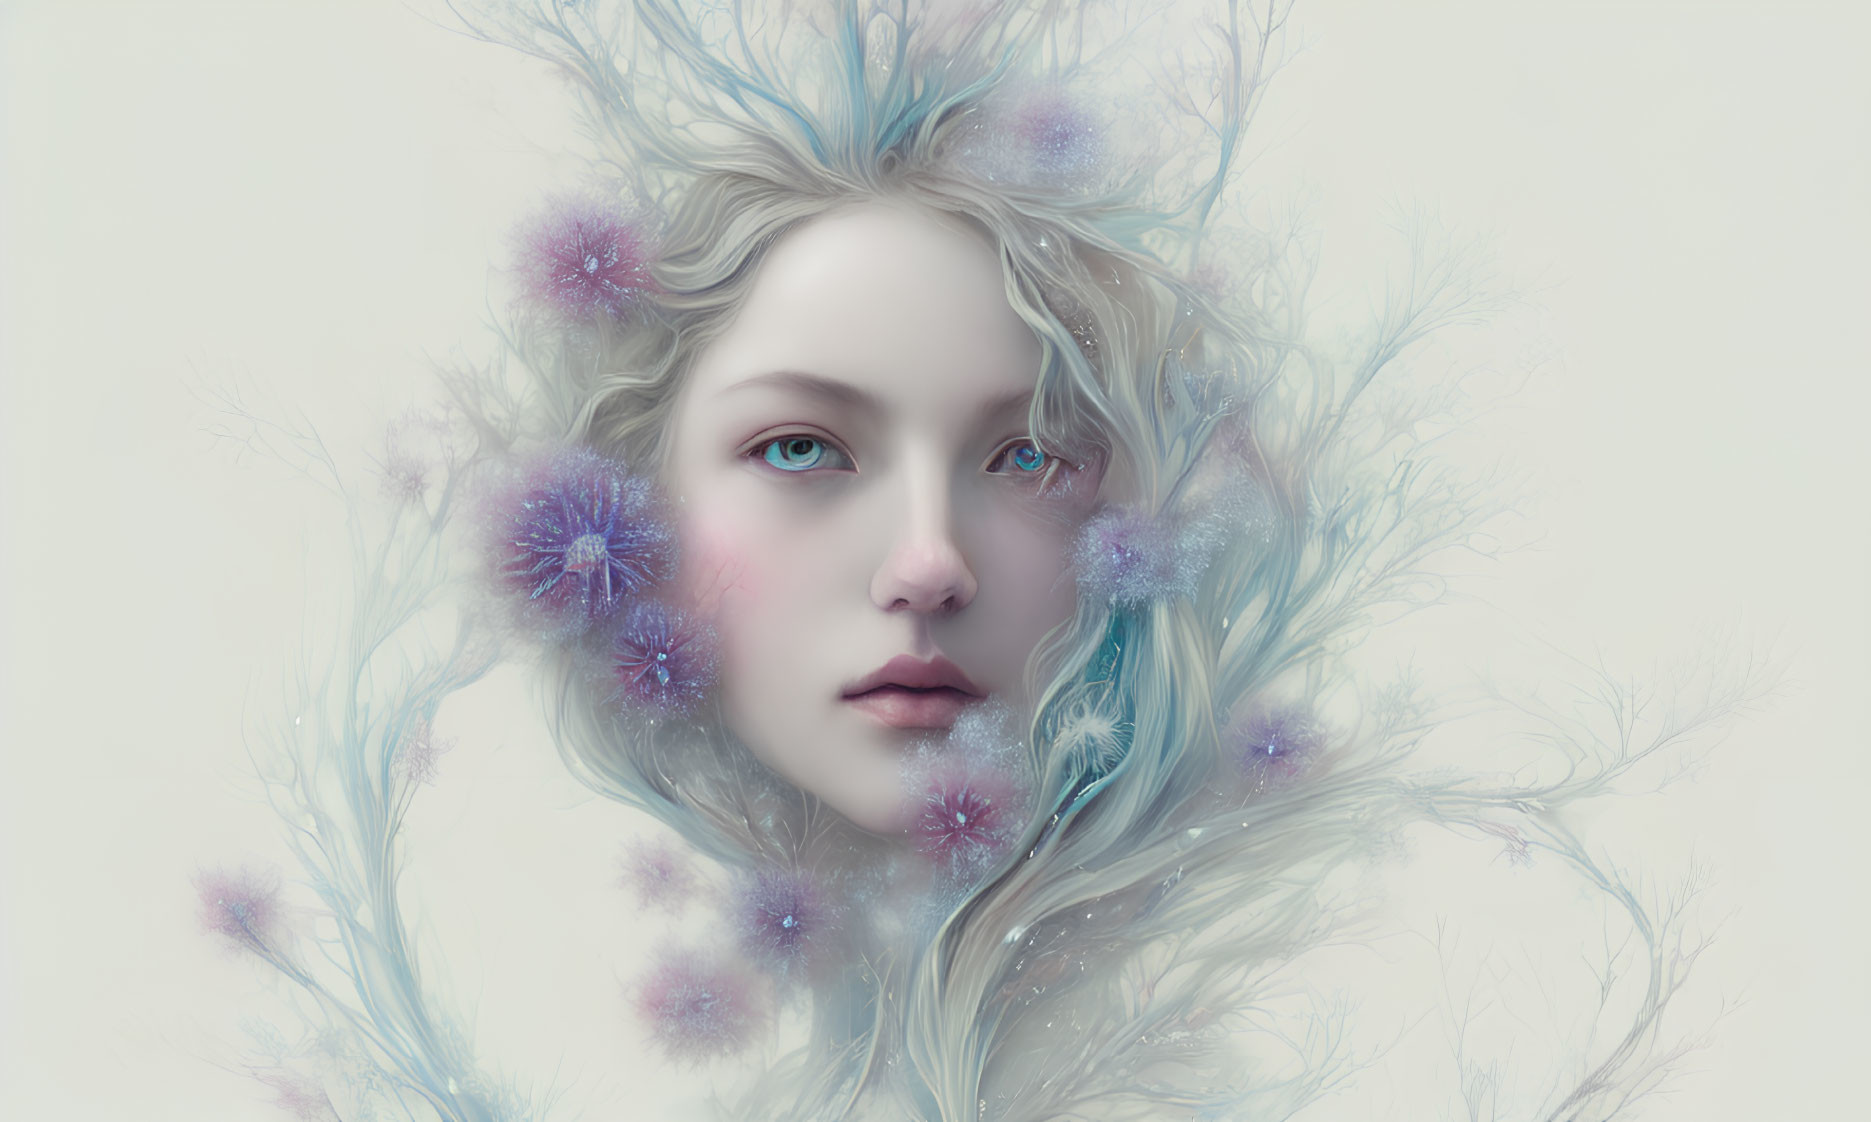 Digital artwork featuring pale-skinned woman among ice-like branches and frost-covered flowers.